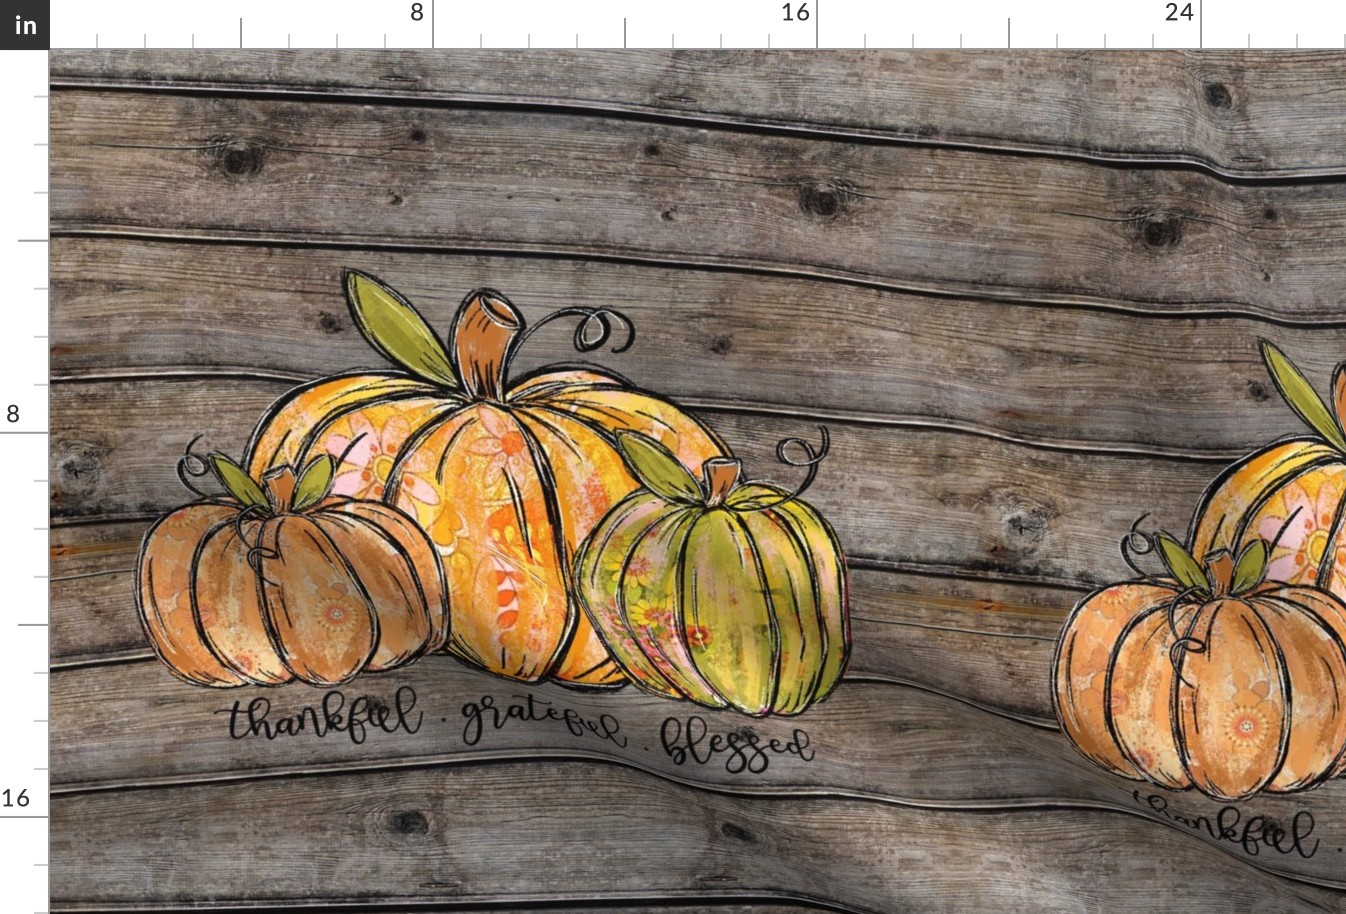 Thankful Grateful Blessed Pumpkins on Barnwood 18 inch square